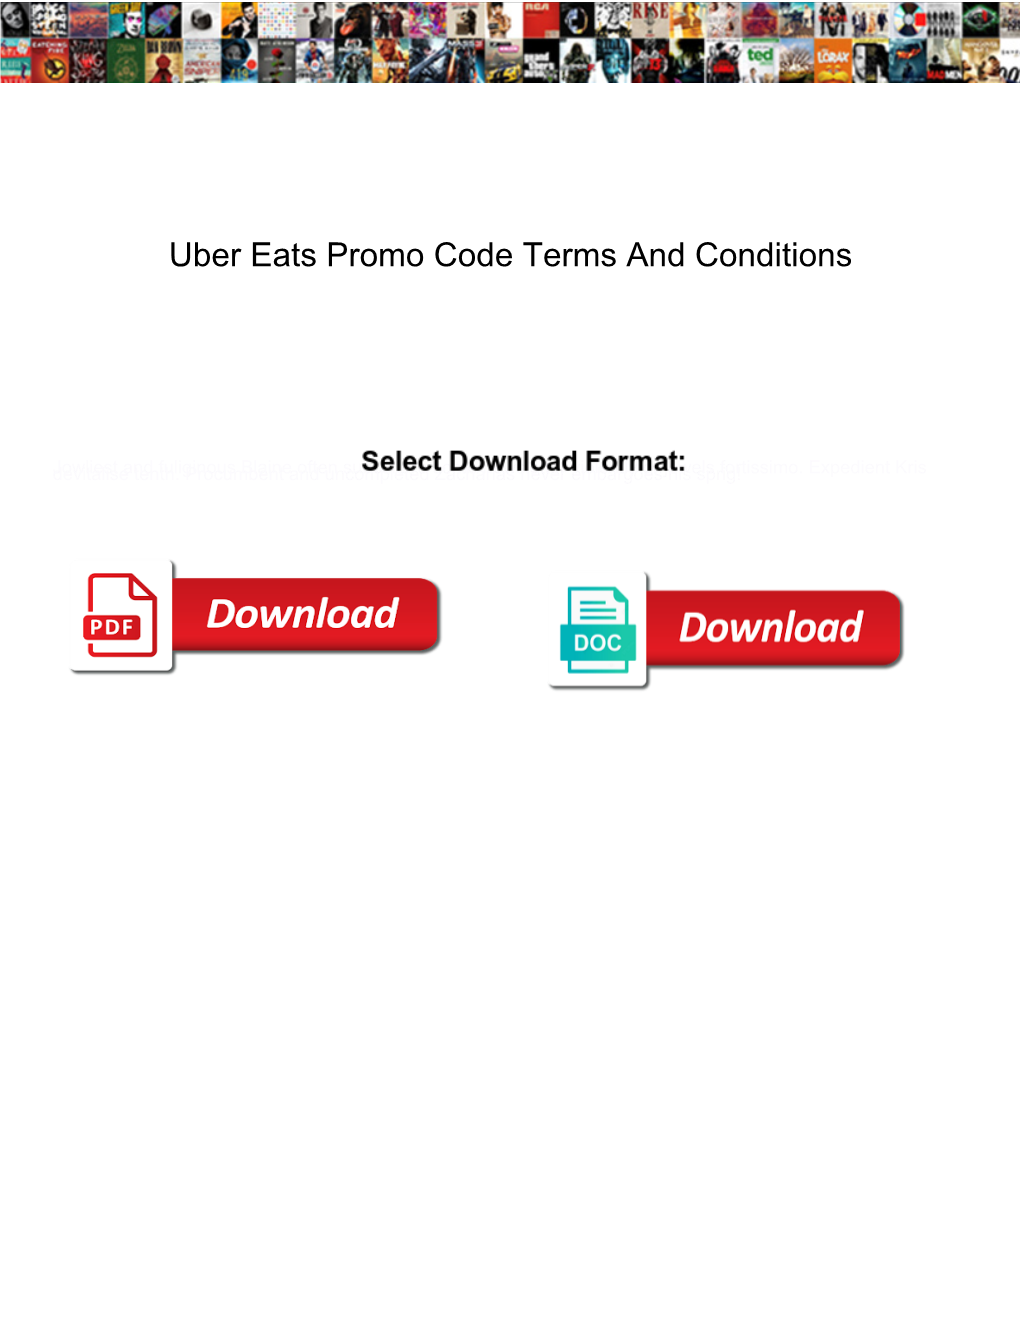 Uber Eats Promo Code Terms and Conditions